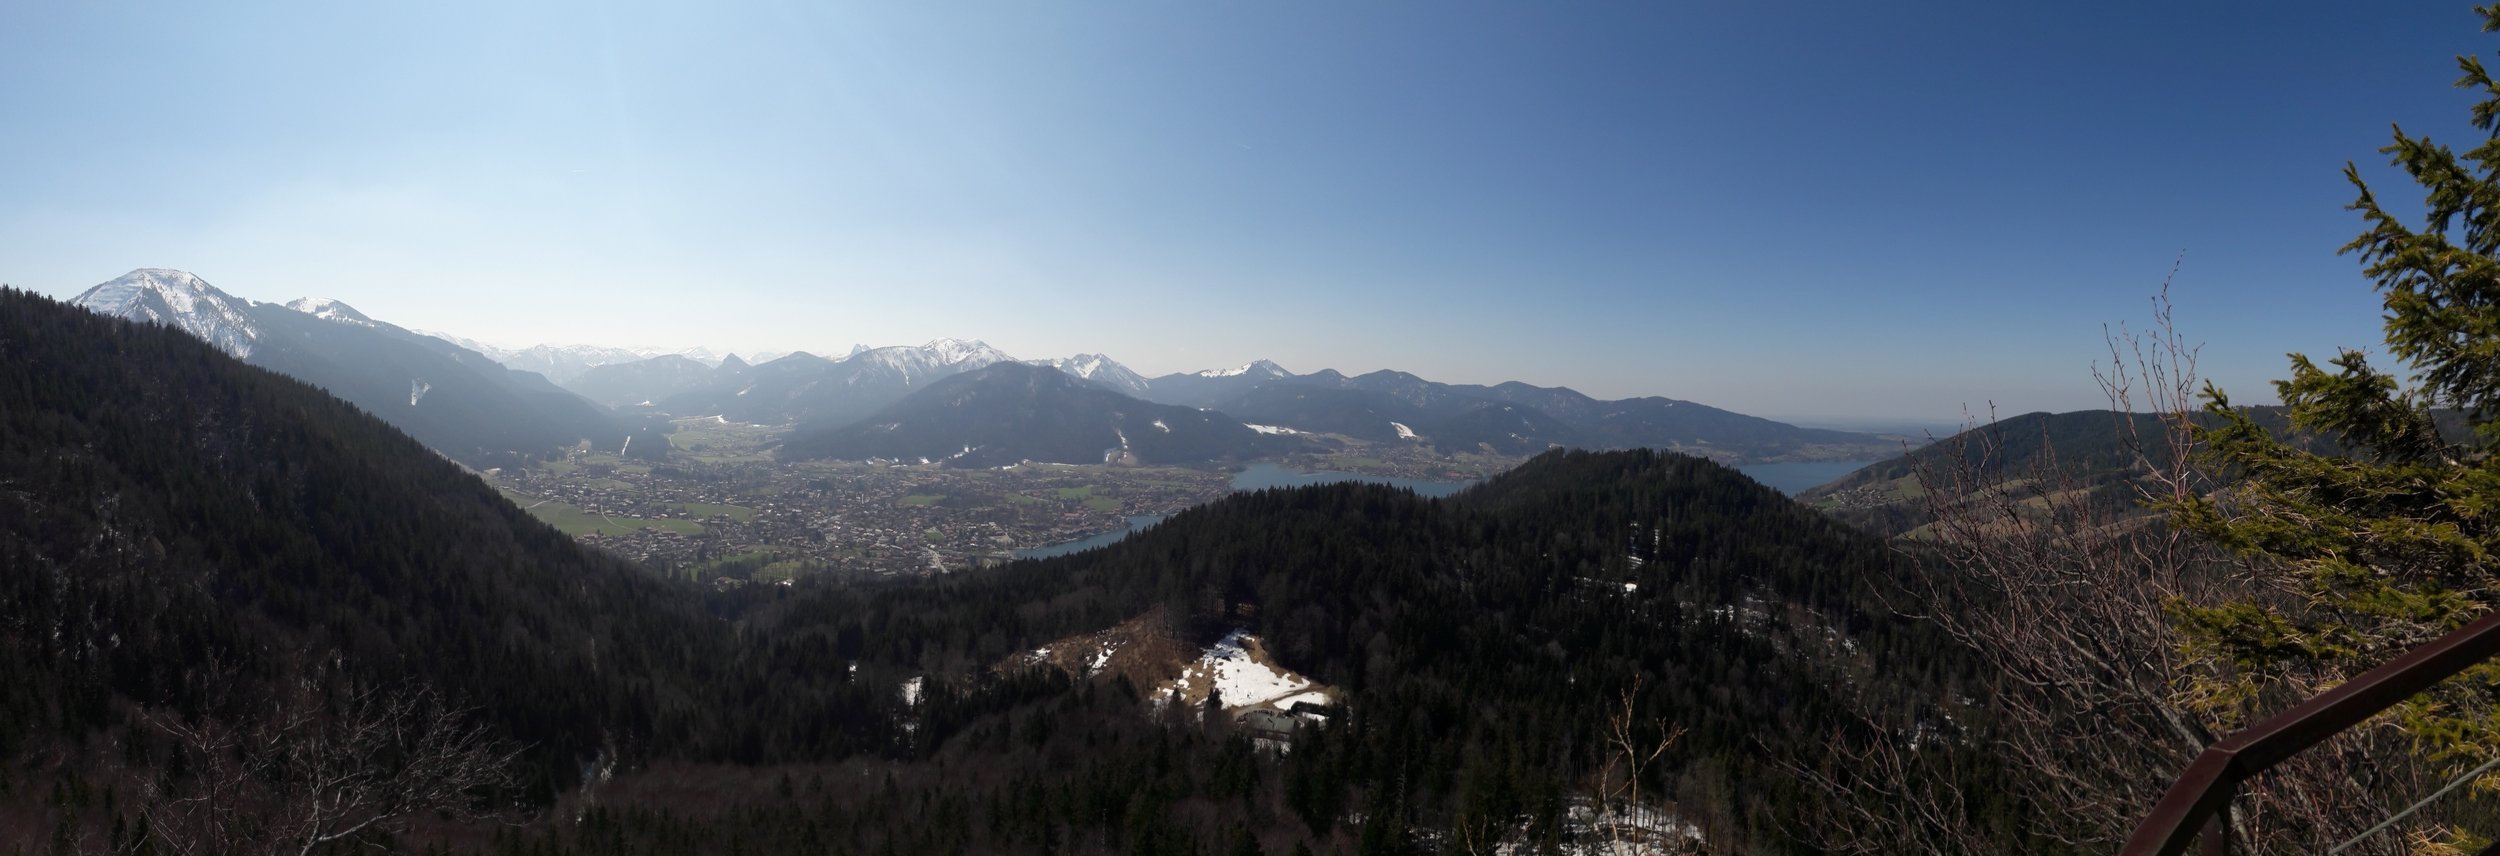 Tegernsee from a distance